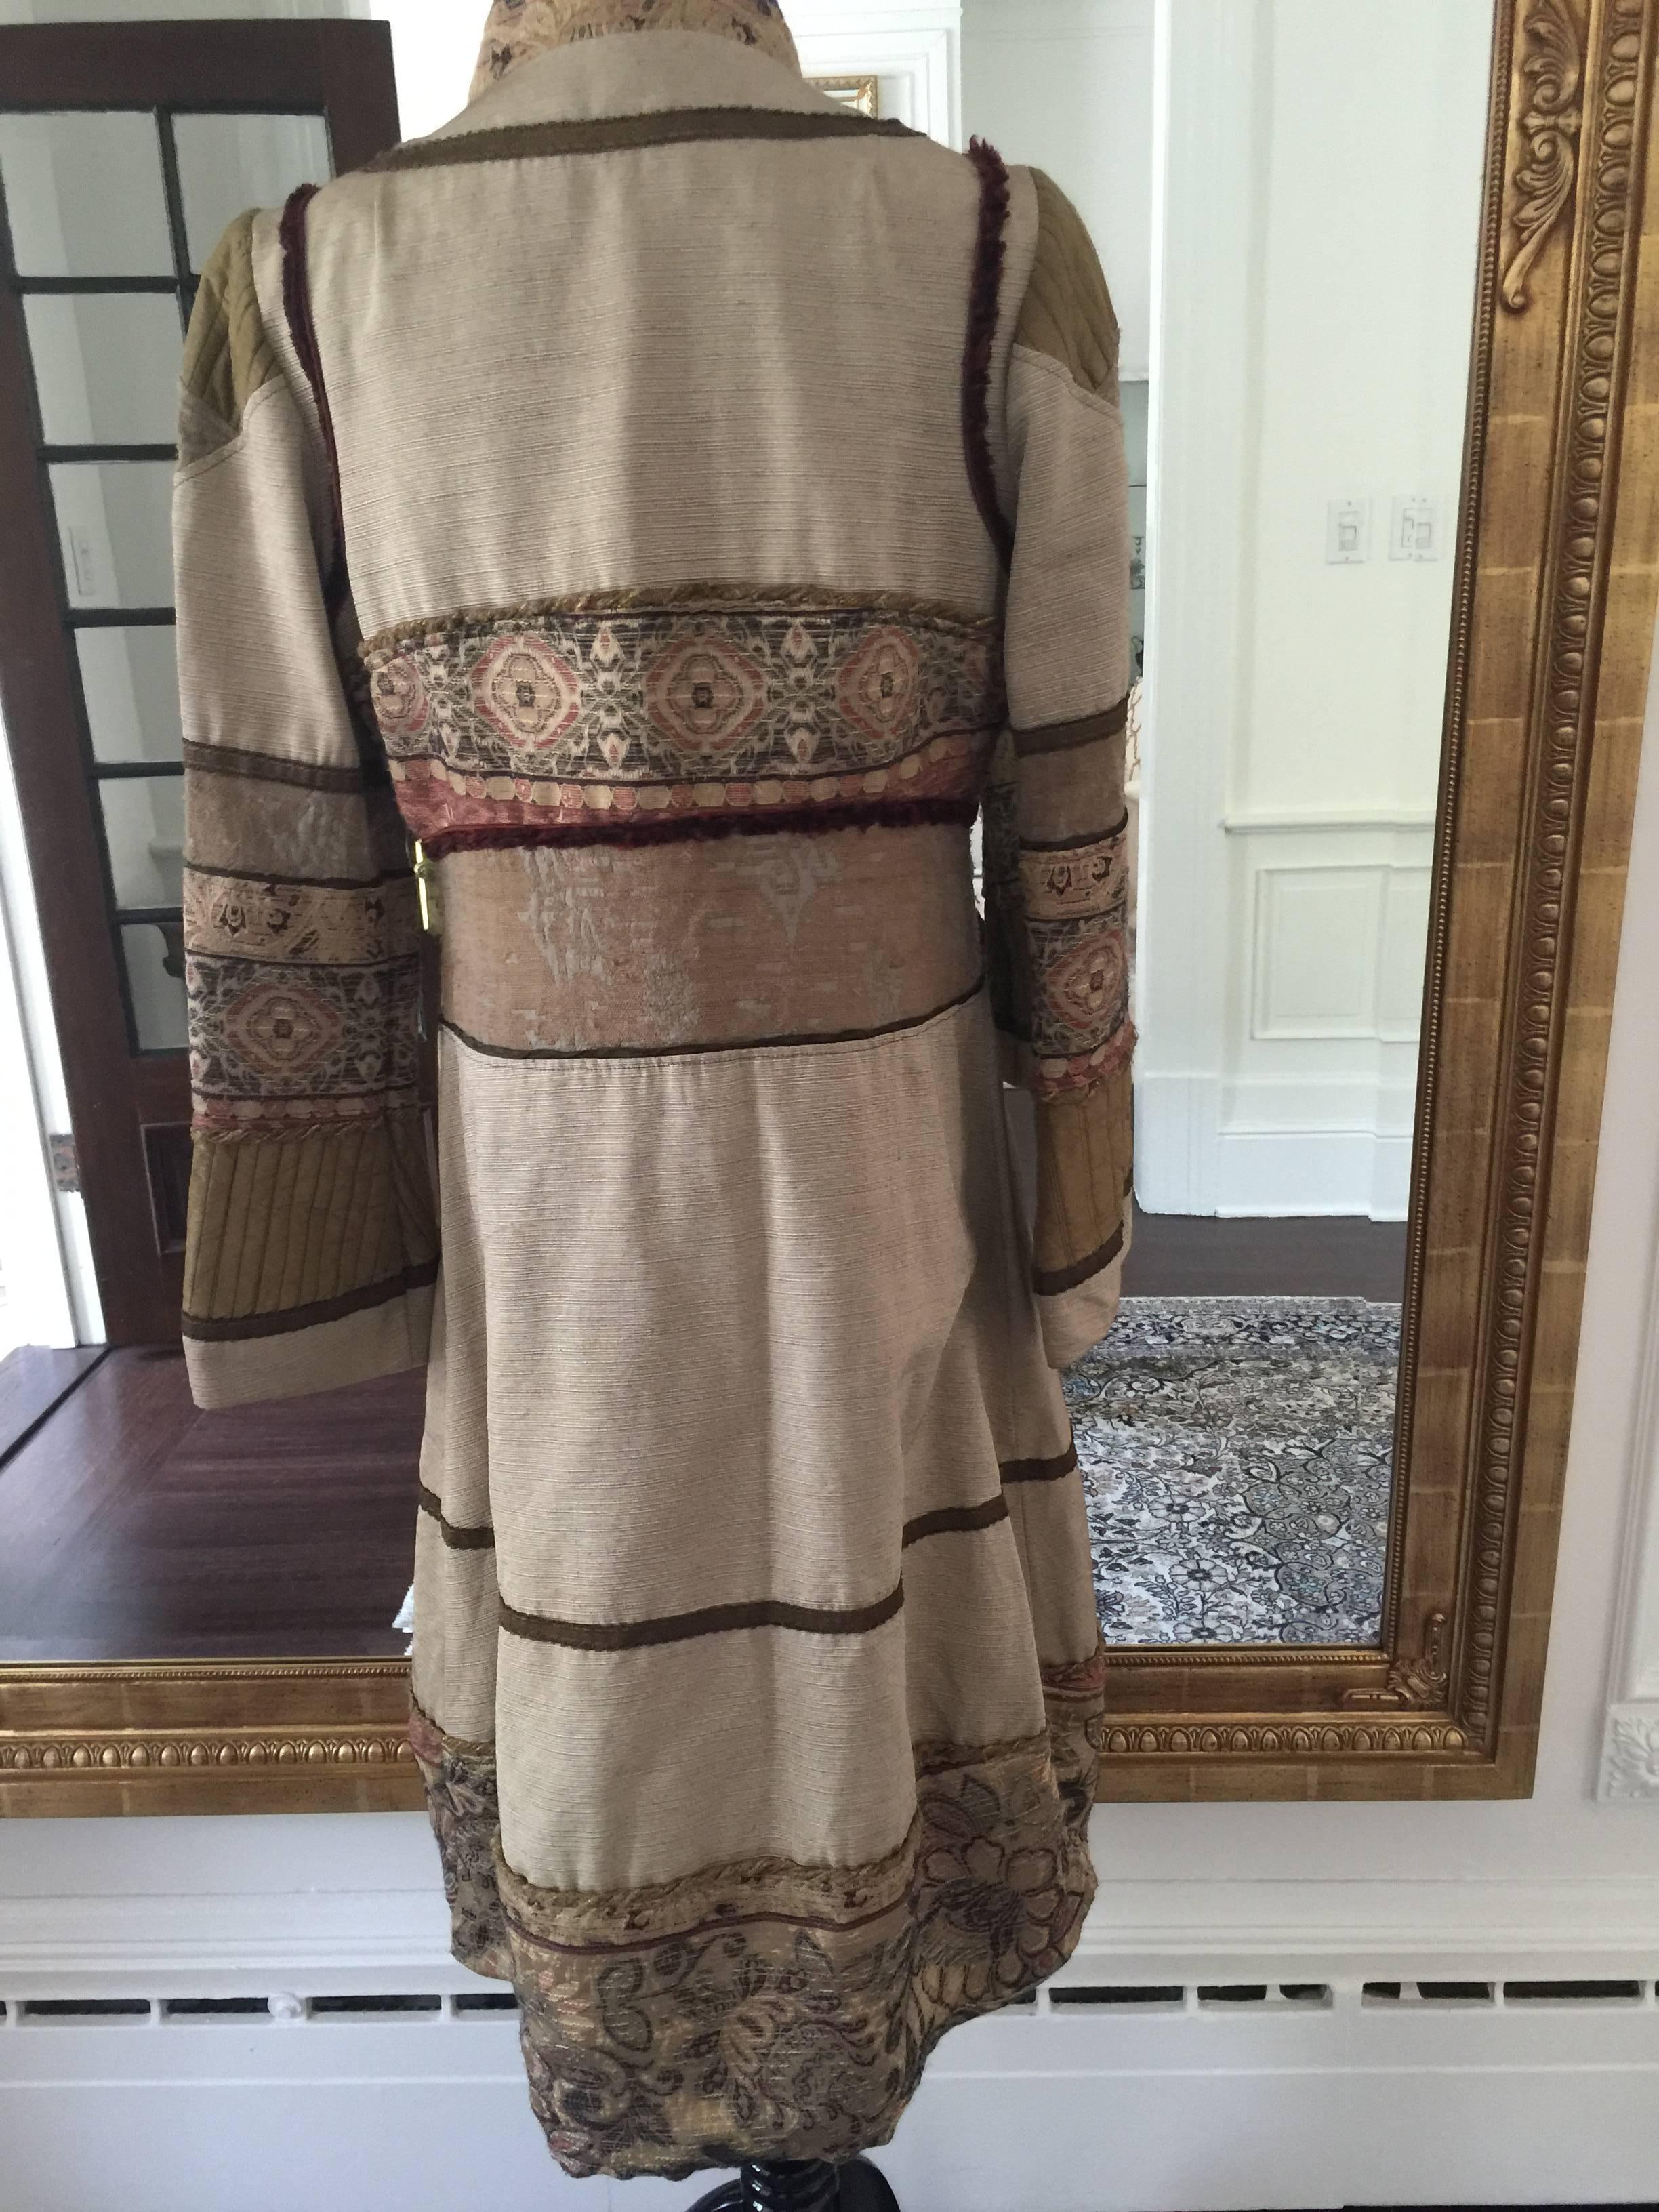 A very unique silk blend coat by Gary Graham, it very boho chic in feeling with its intricate and delicate jacquard trims,
button front with bell decorated sleeves.